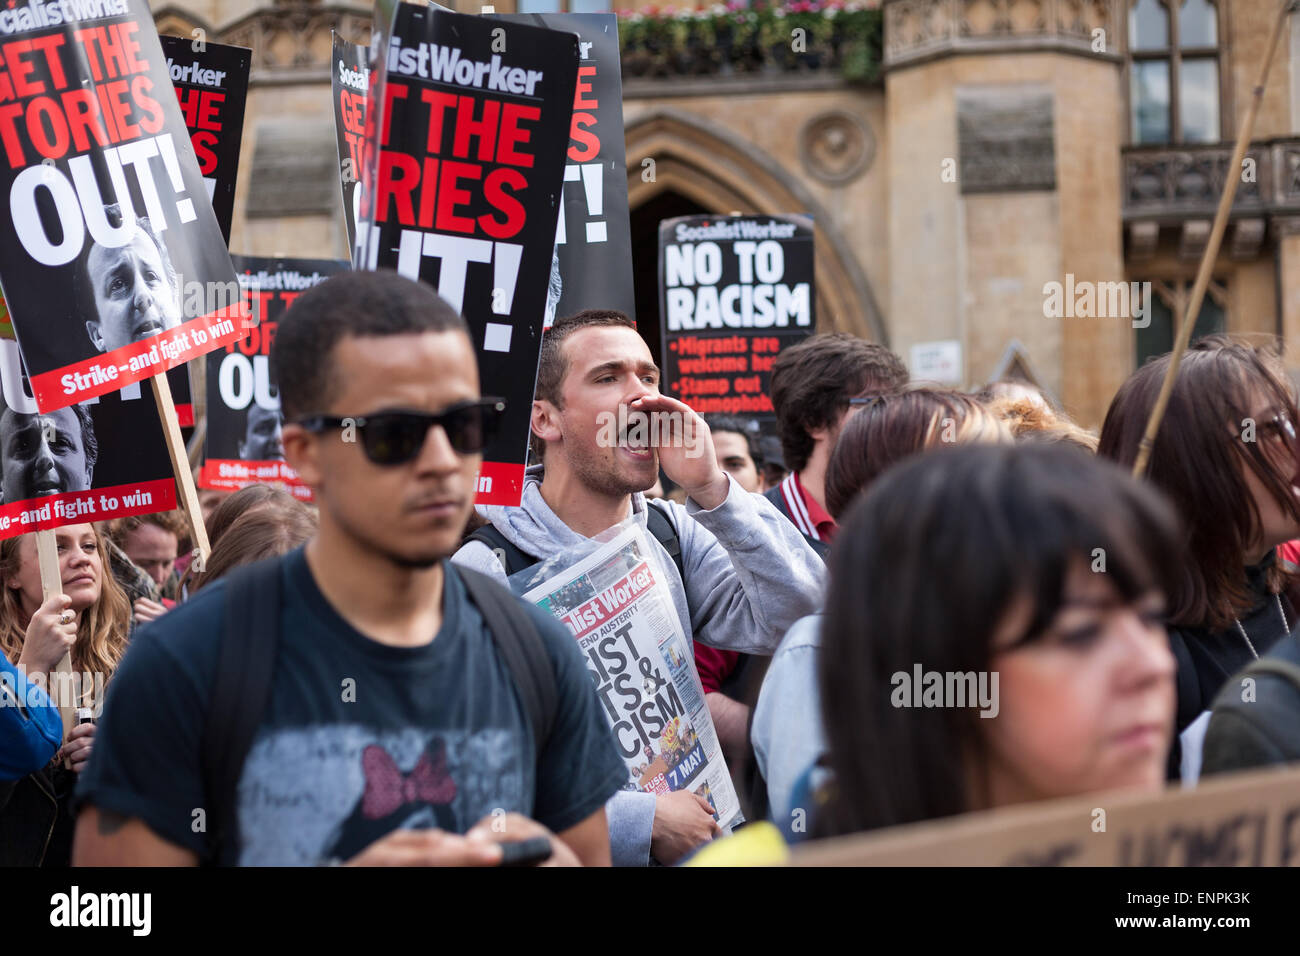 London, UK. 9th May, 2015. Demonstrators gather at the start of an anti-Tory protest in central London, held two days after the UK general election gave David Cameron's Conservative Party - the Tories - a parliamentary majority. The centre-right Conservative Party are now set to govern the UK for the next five years without the need to form a coalition with any other party. Credit:  David Cliff/Alamy Live News Stock Photo